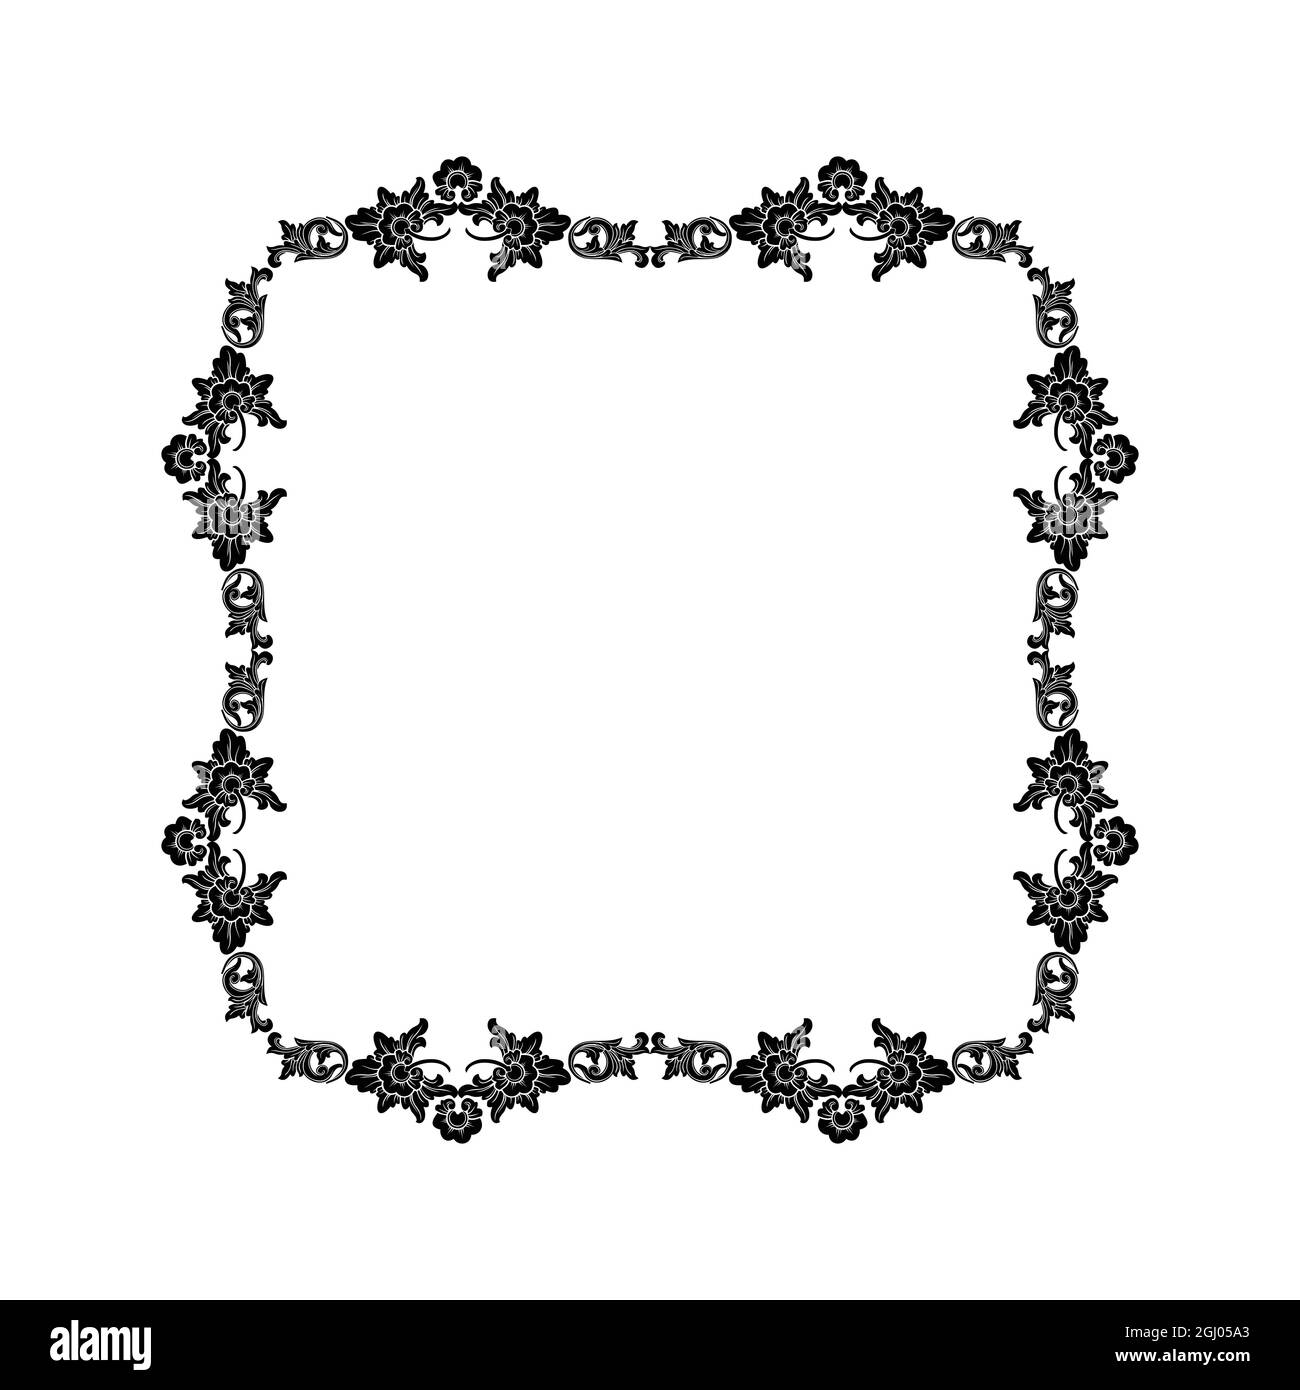 Balinese carving motif frame for invitations, certificates etc Stock Vector